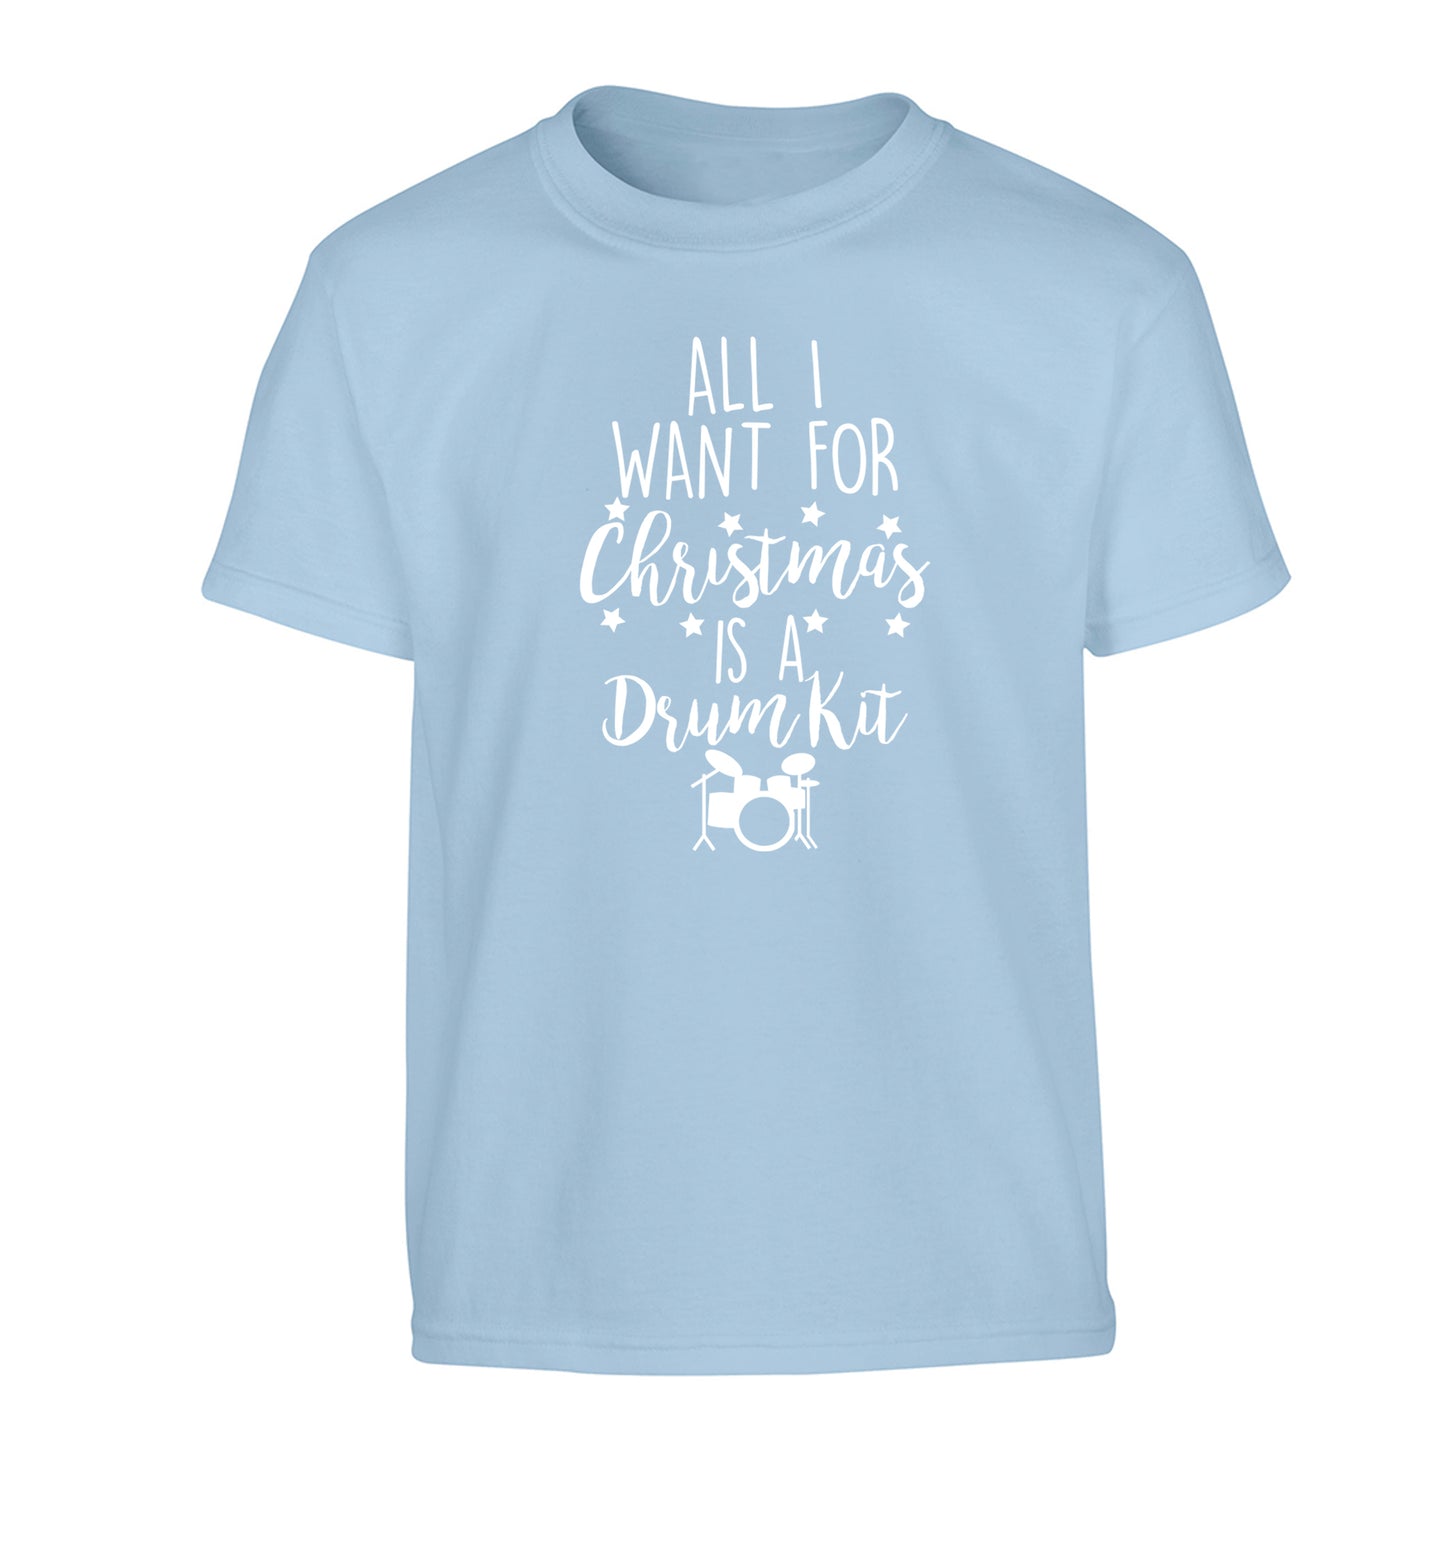 All I want for Christmas is a drum kit! Children's light blue Tshirt 12-14 Years